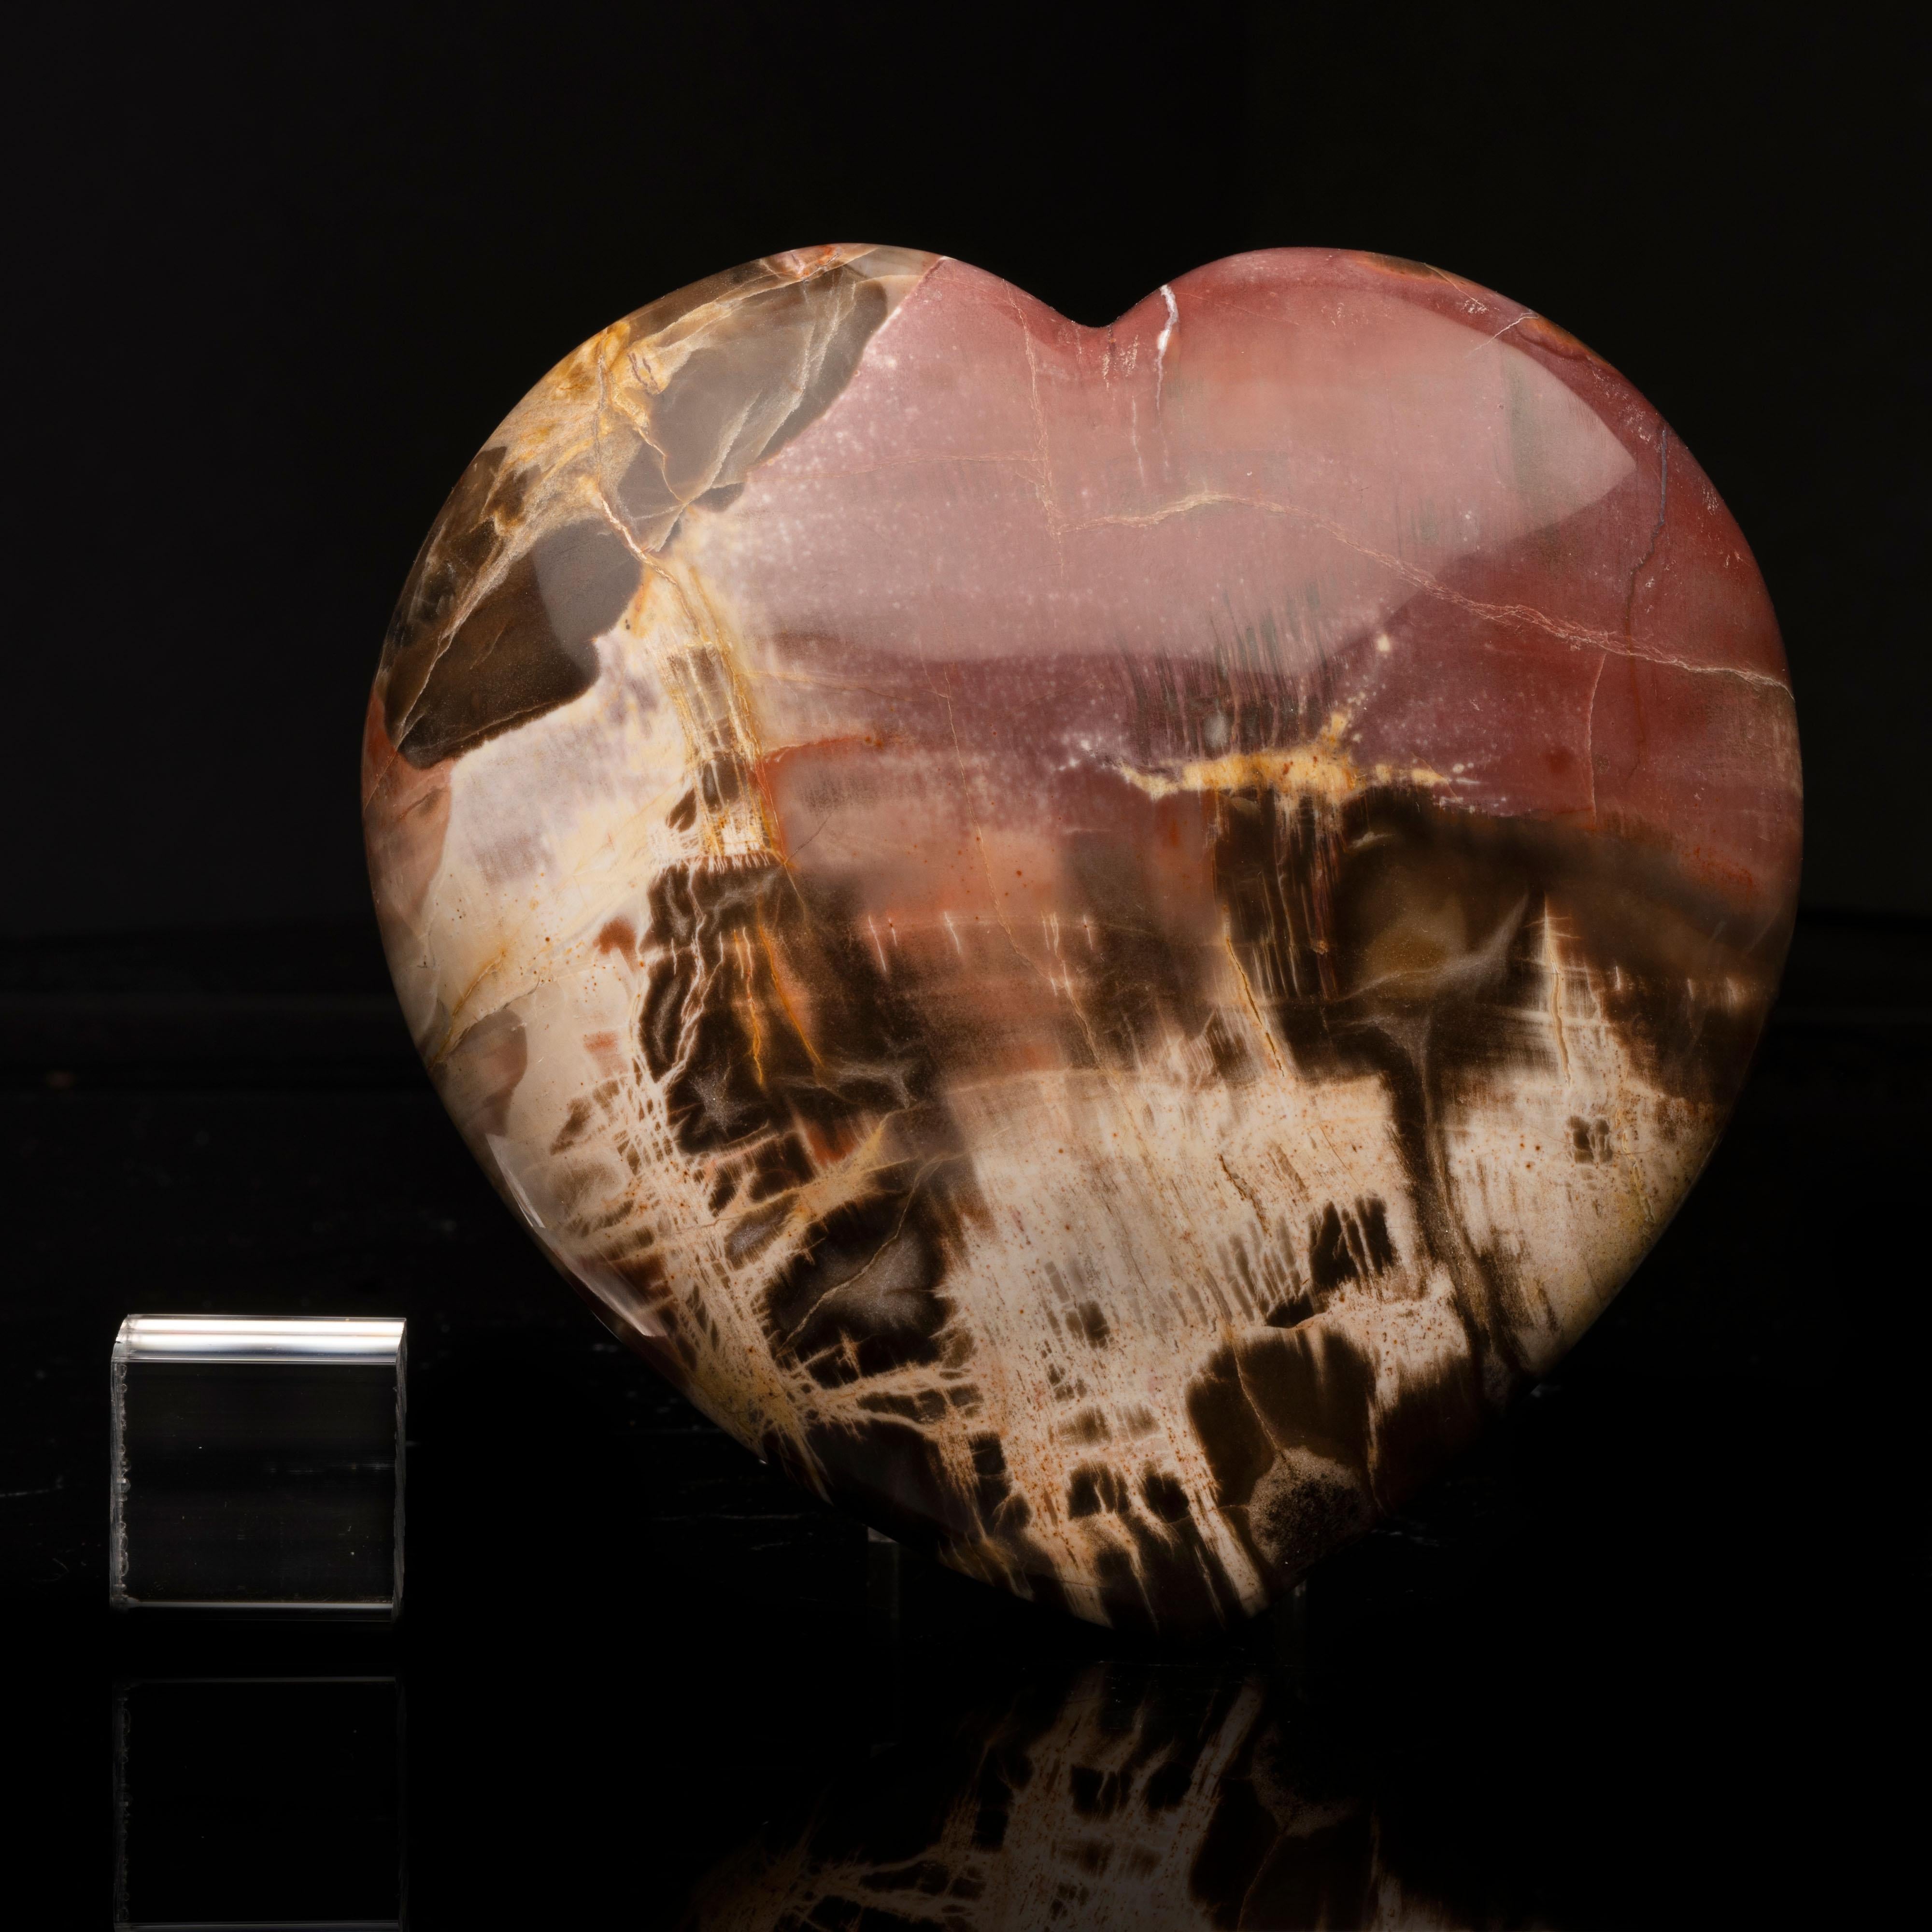 Hand-Carved Genuine 220 Million Year Old Petrified Wood Heart from Madagascar // 2.93 Lb